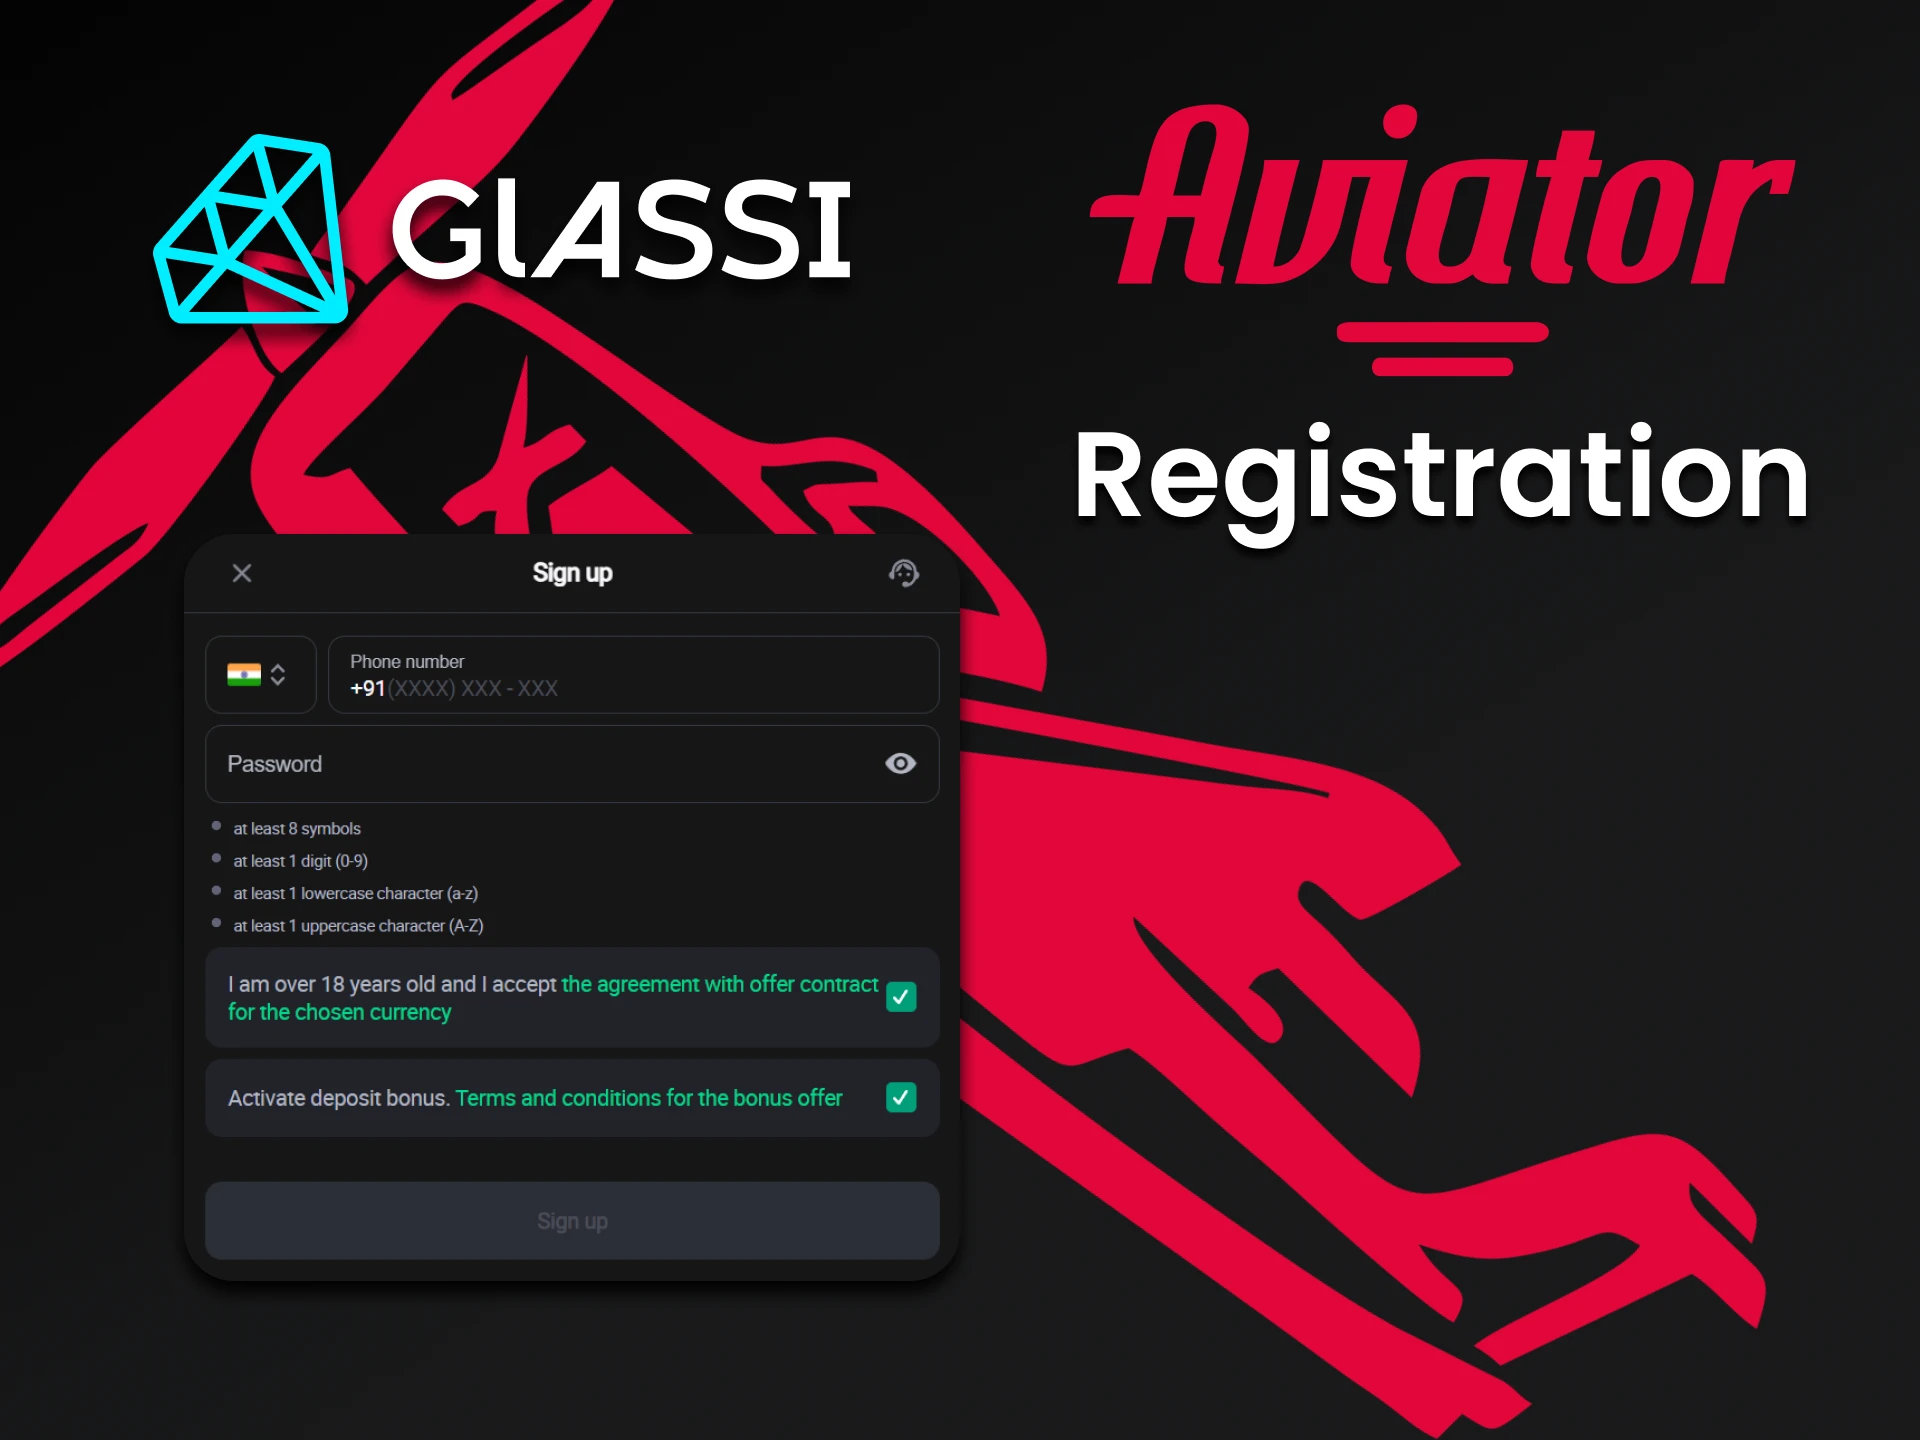 Fill out the registration form to play Aviator at Glassi Casino.